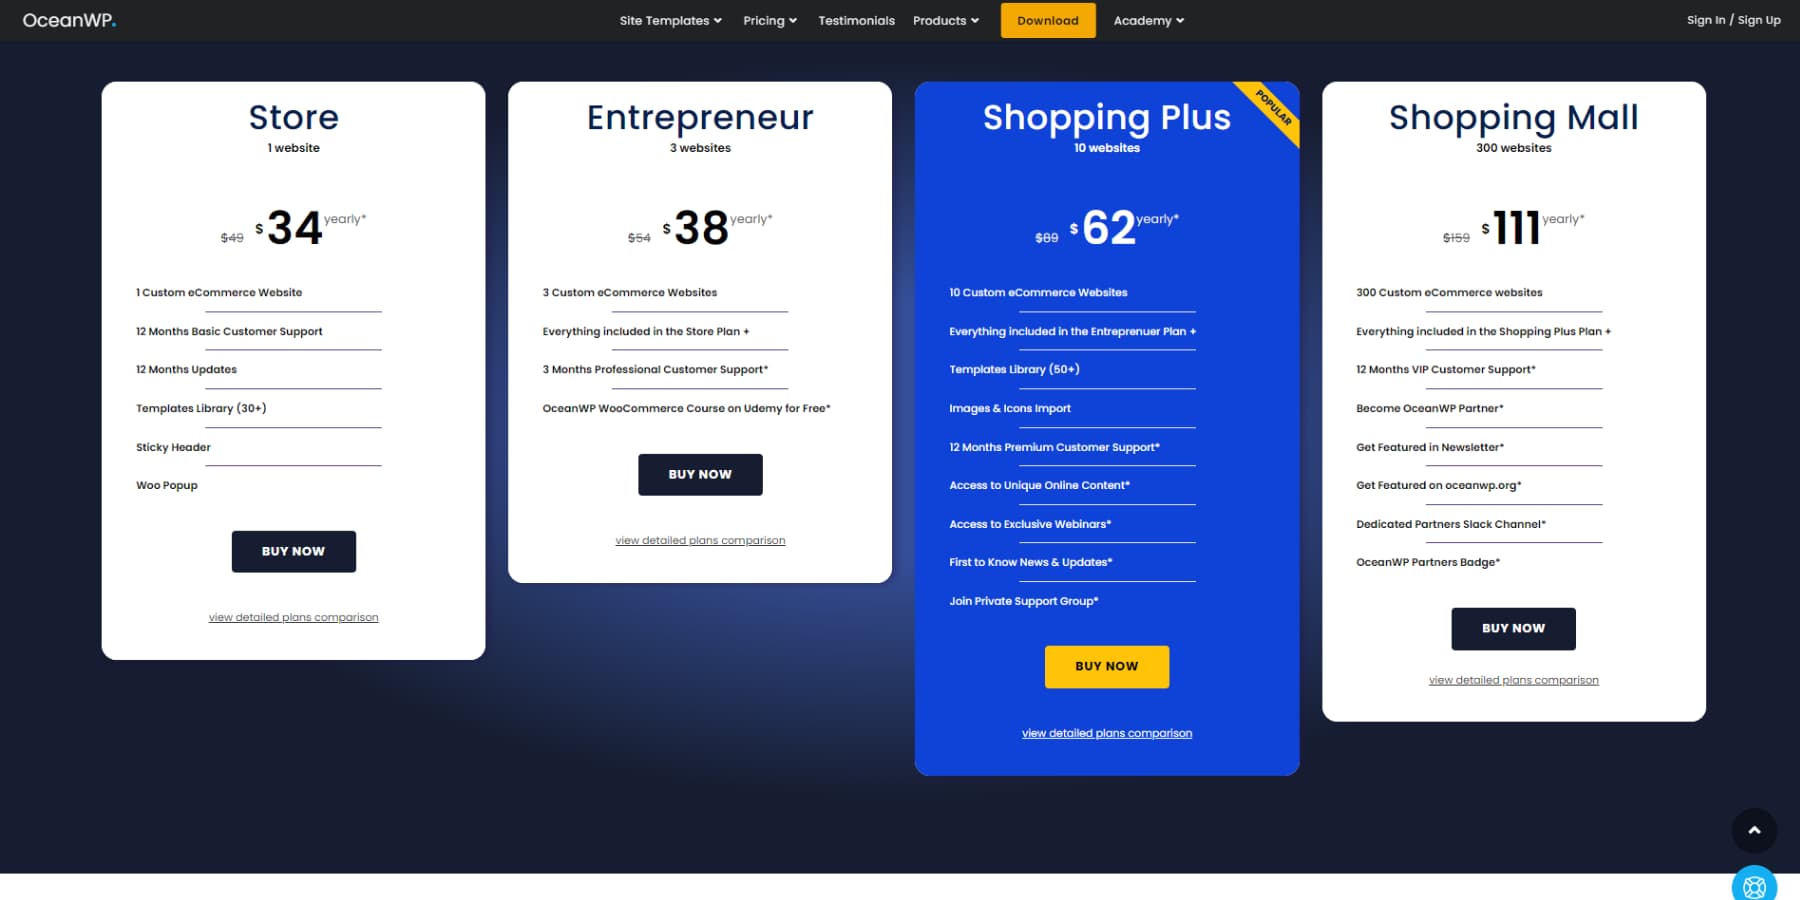 A screenshot of OceanWP's eCommerce pro bundle pricing